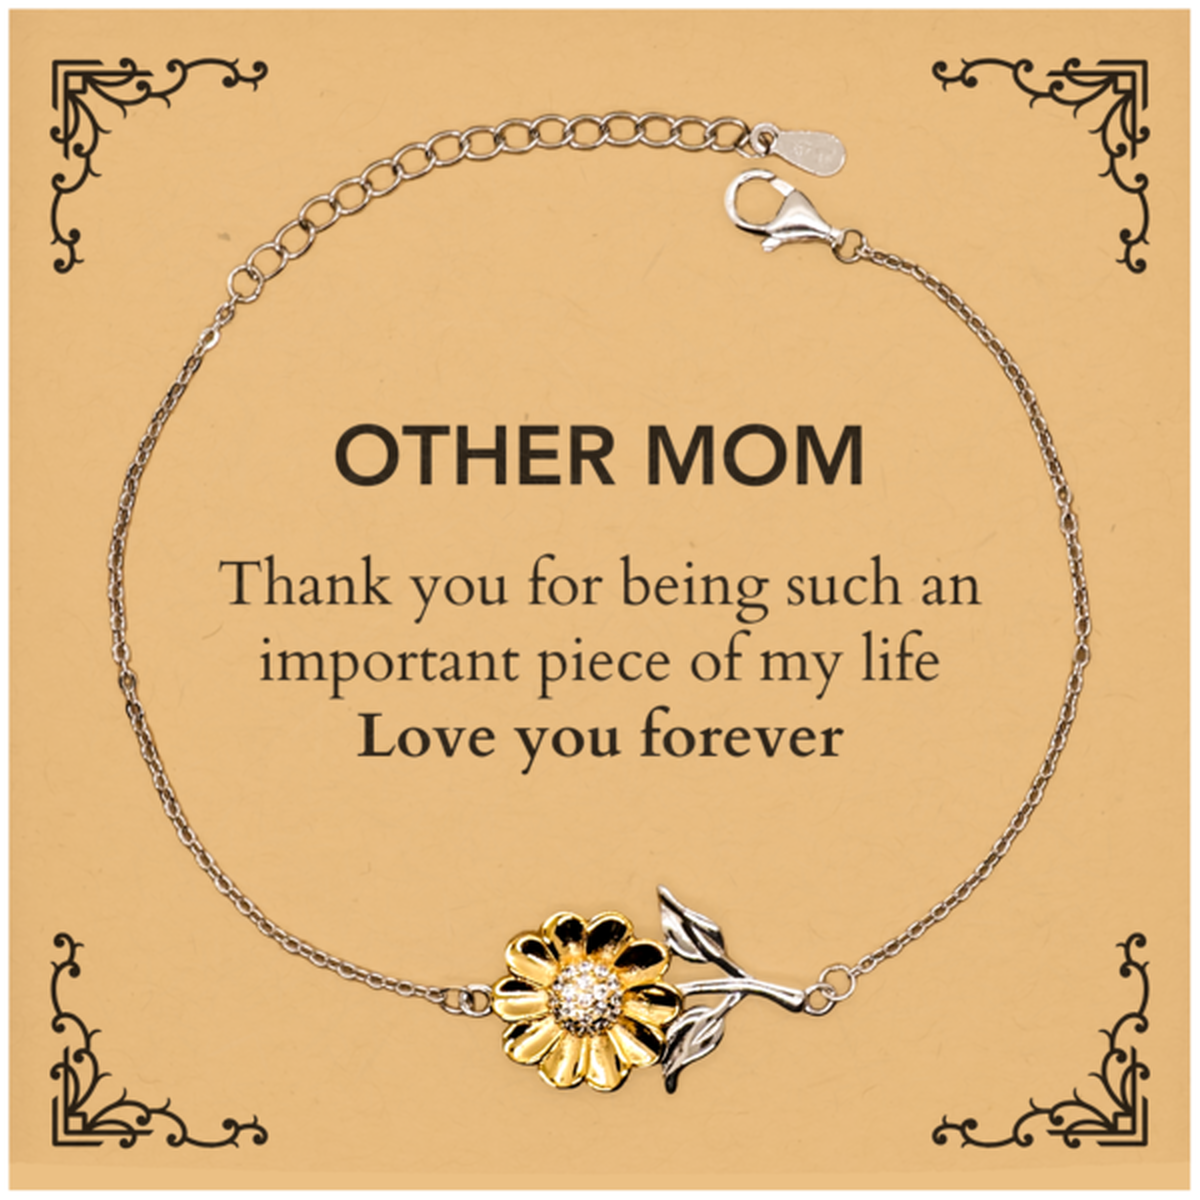 Appropriate Other Mom Sunflower Bracelet Epic Birthday Gifts for Other Mom Thank you for being such an important piece of my life Other Mom Christmas Mothers Fathers Day